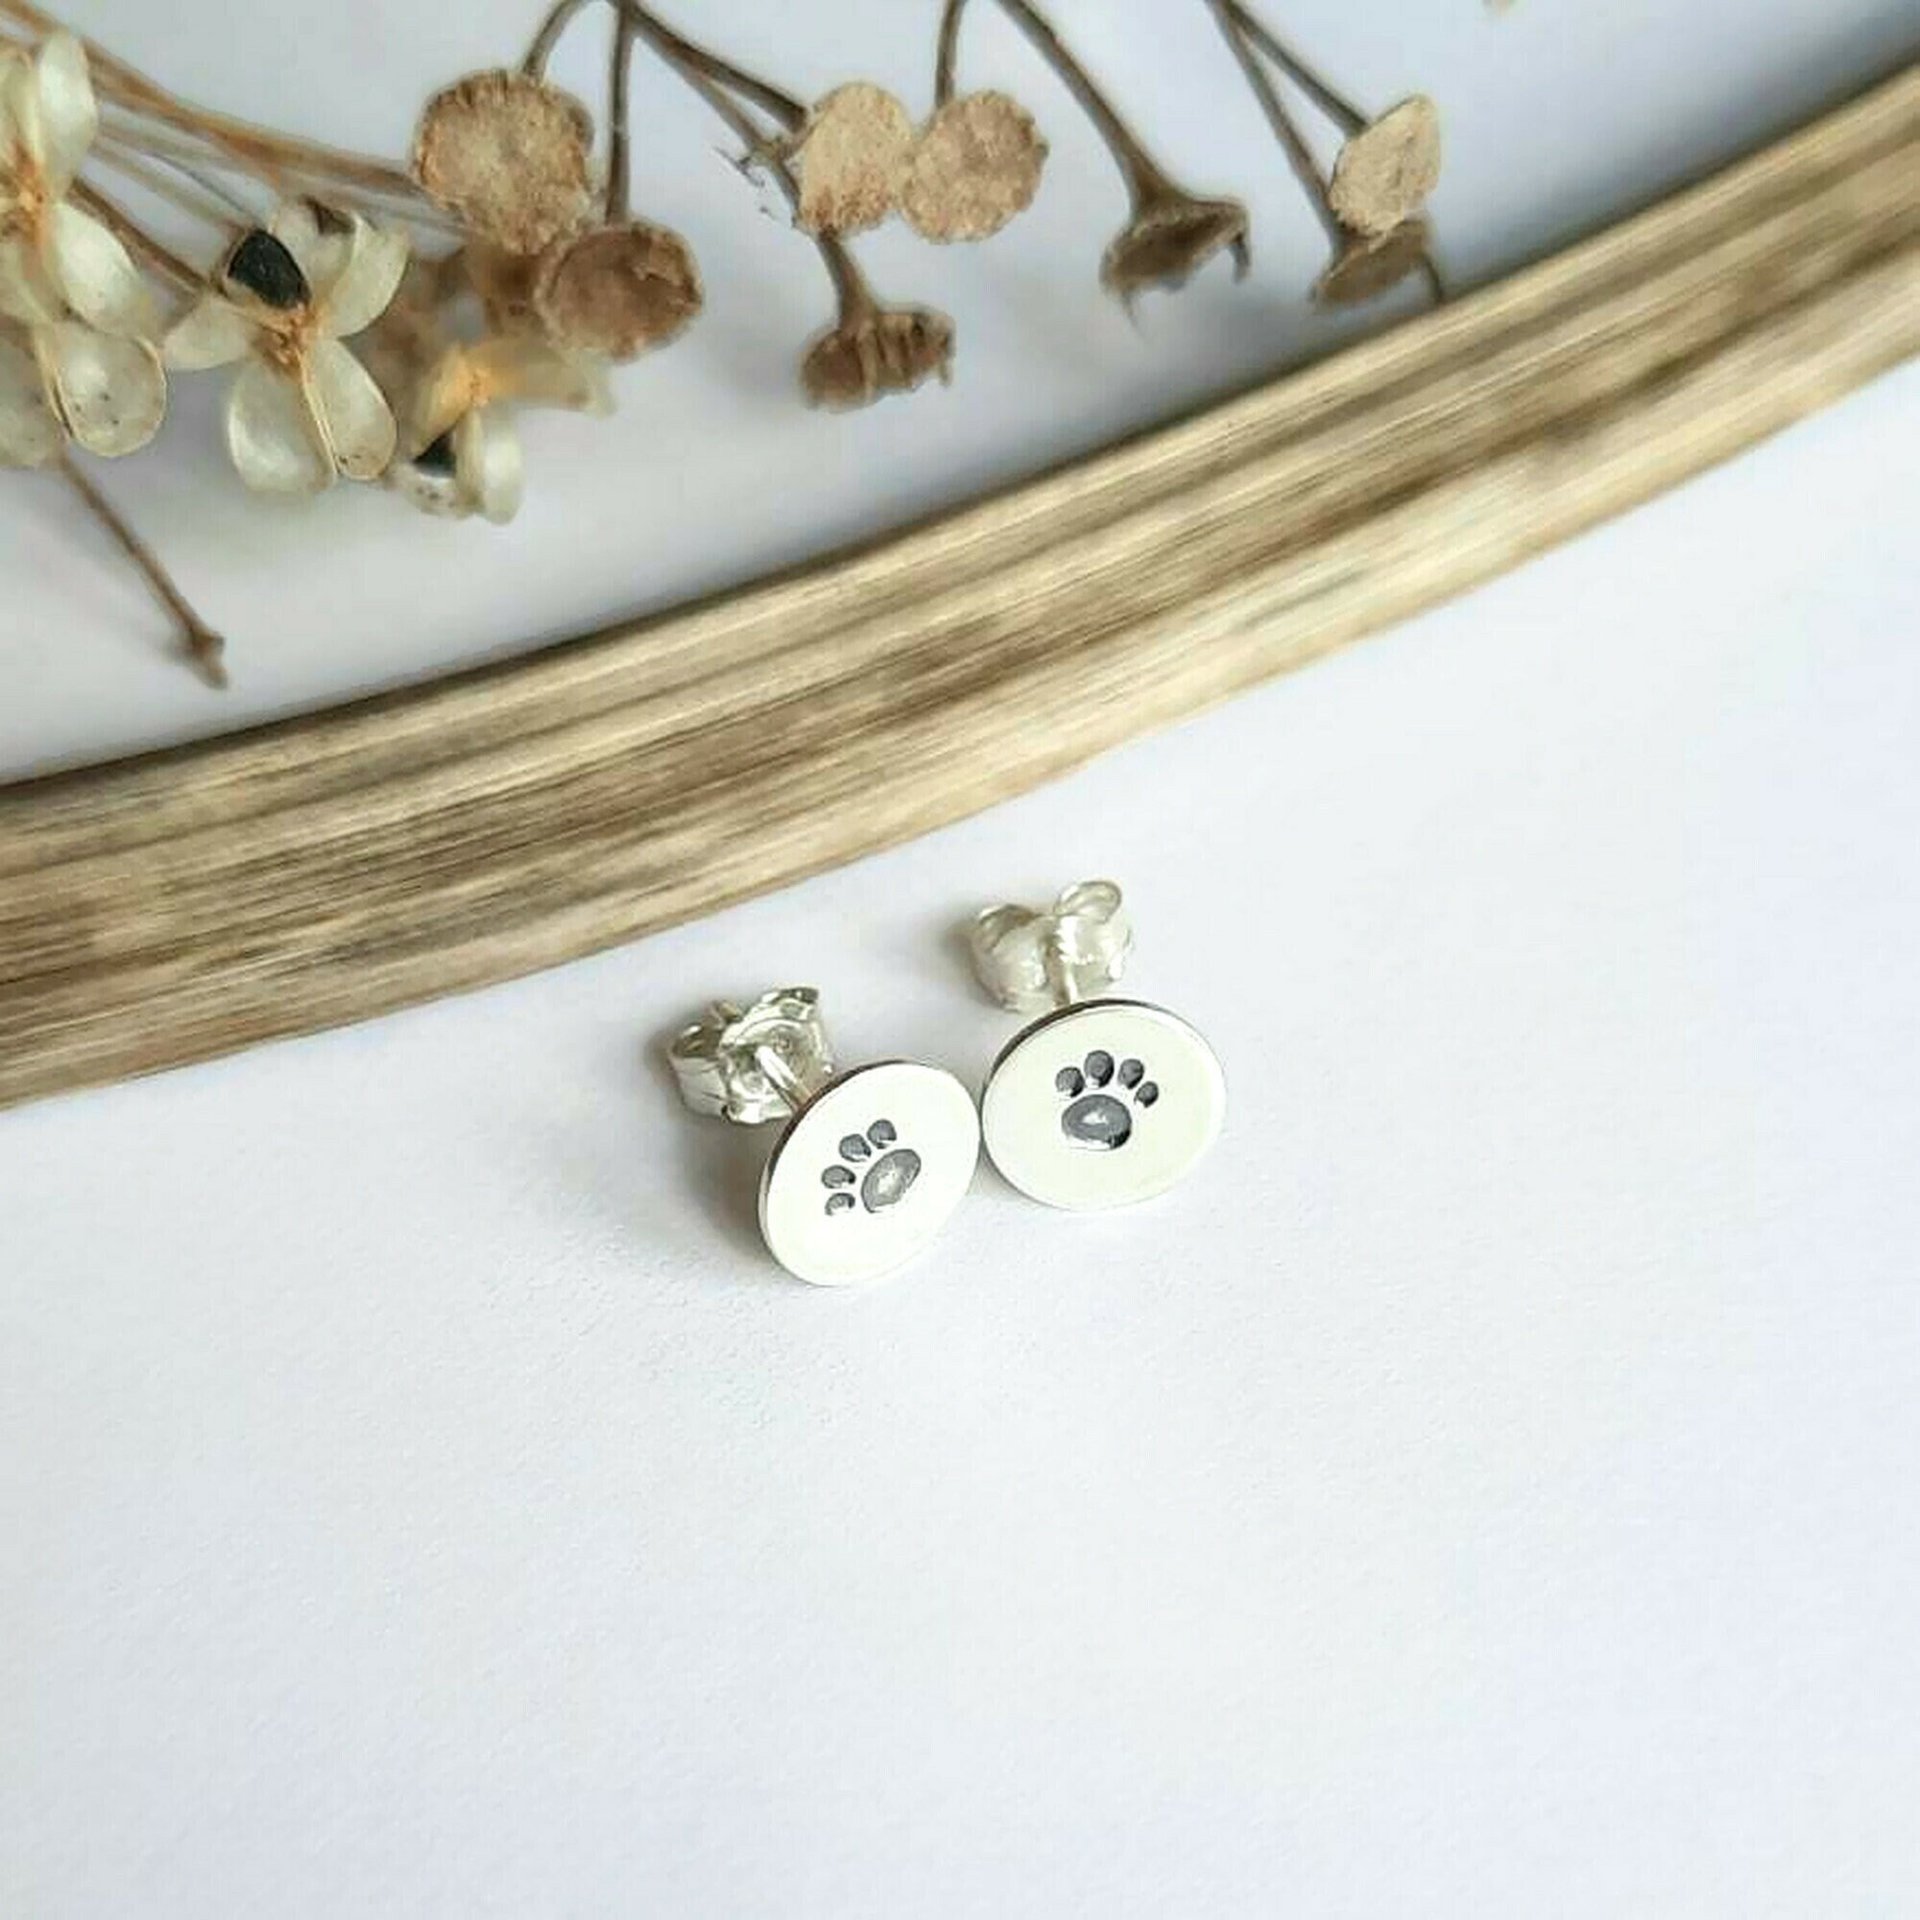 Hand Stamped 925 Sterling Silver Paw Print Earrings ~ Handmade by The Tiny Tree Frog Jewellery